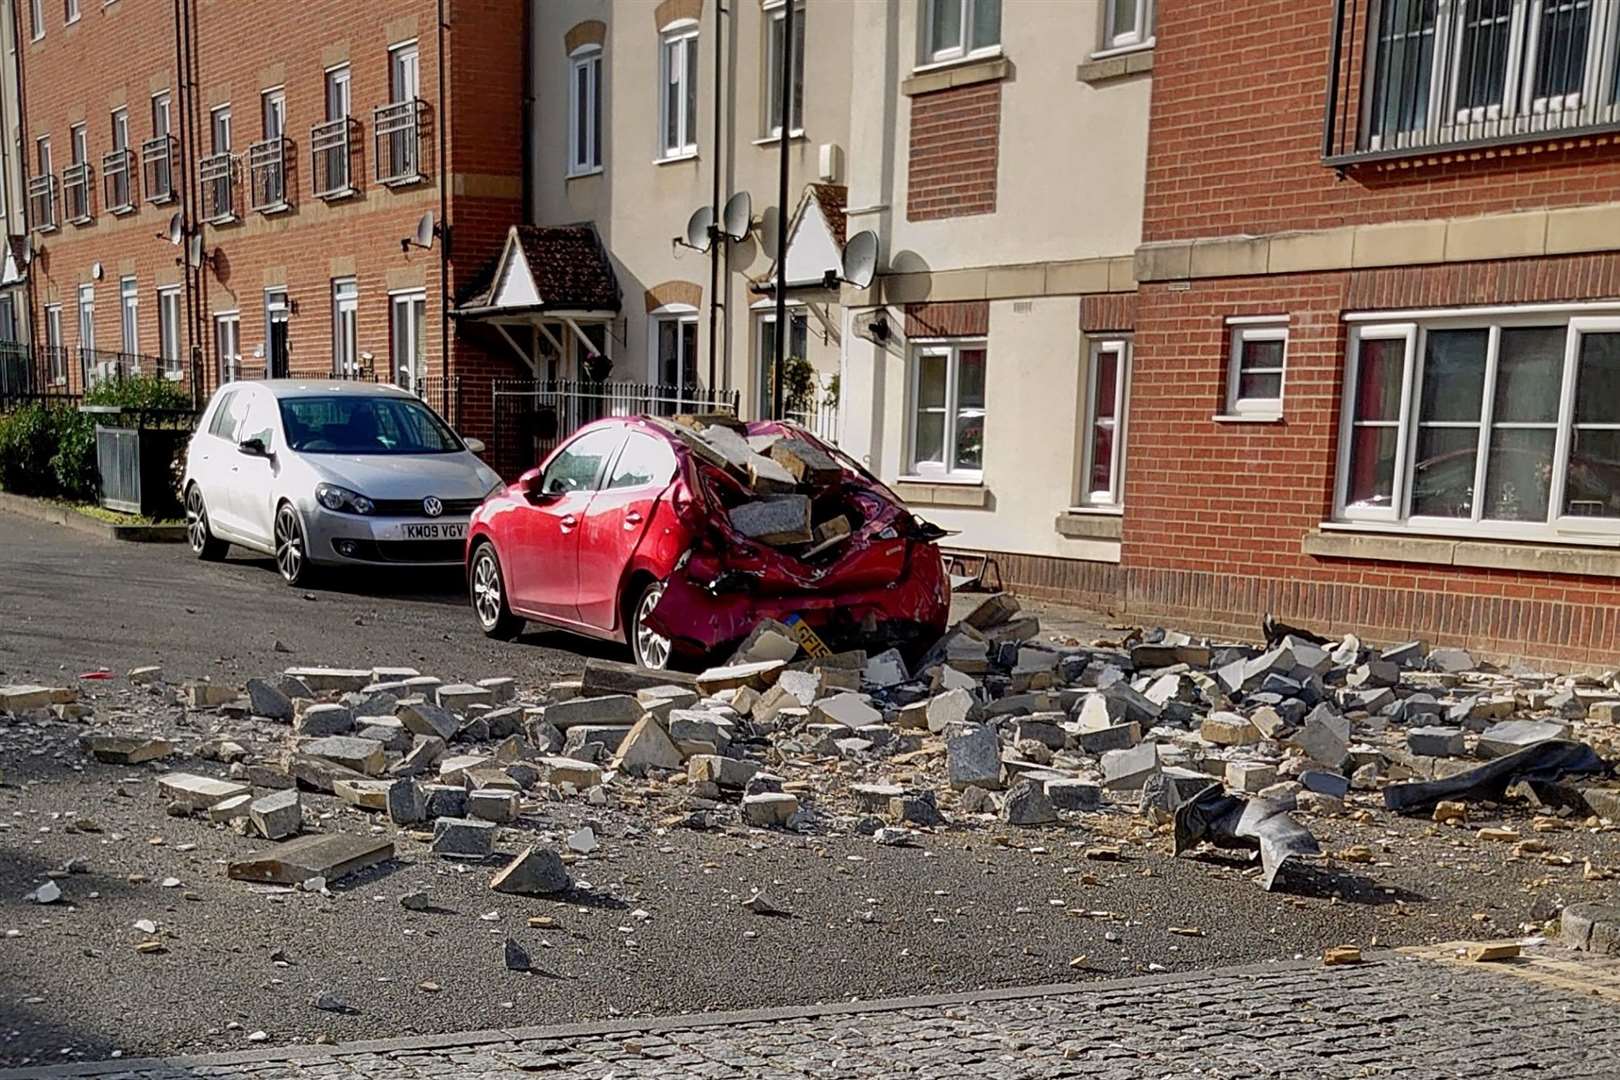 A Mazda3 was in the wrong place at the wrong time. Picture: Clive Bellinger